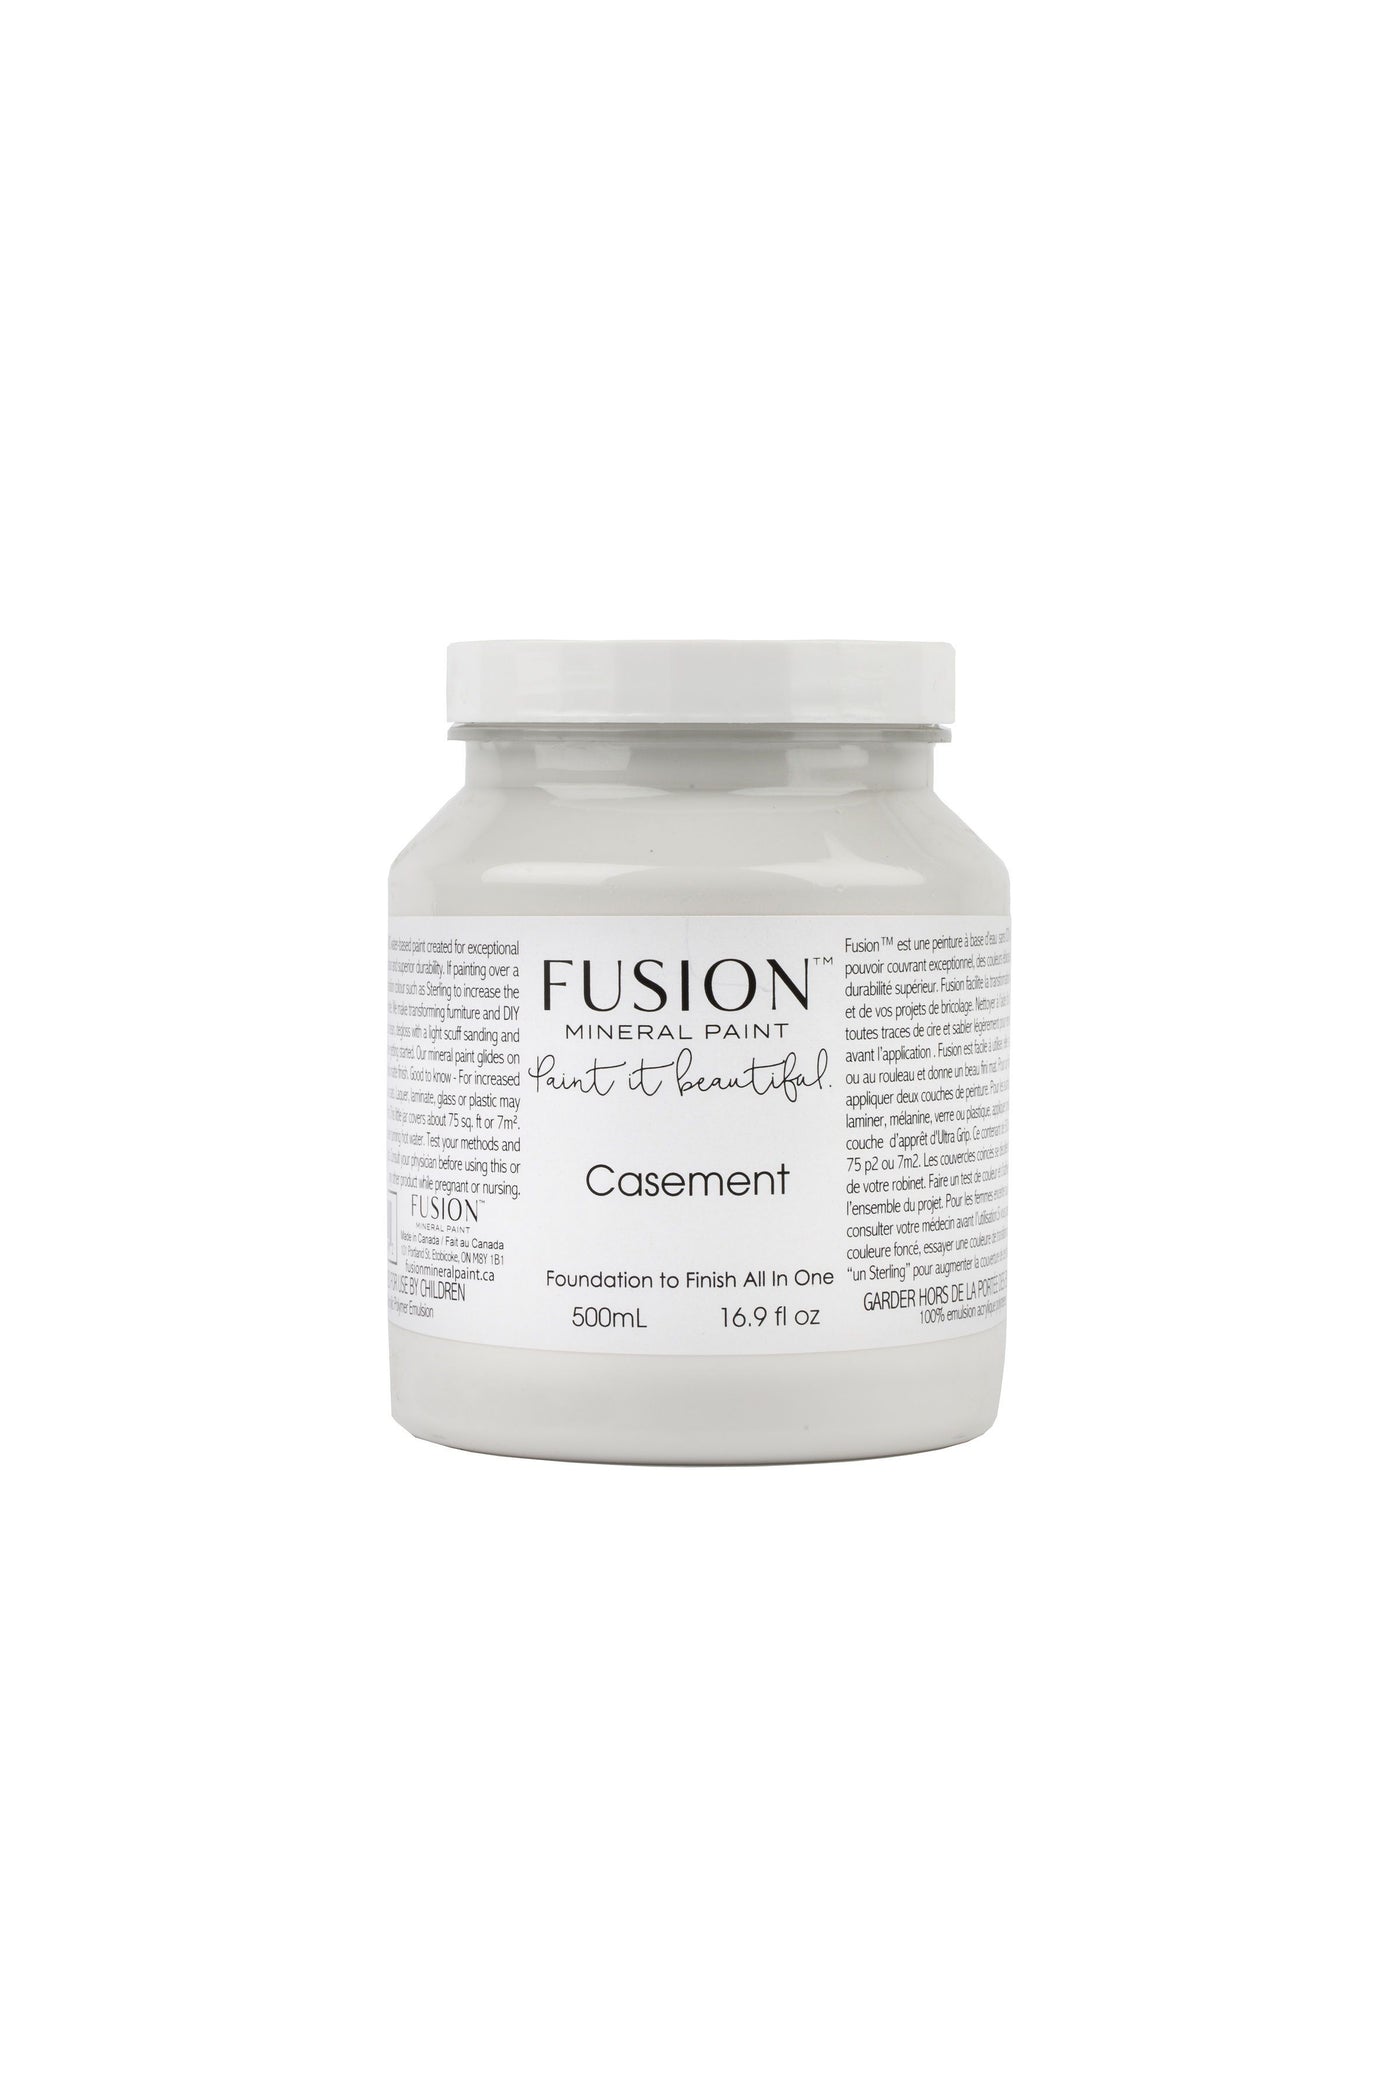 Casement Fusion Mineral Paint crisp soft white 500ml For the Love Creations